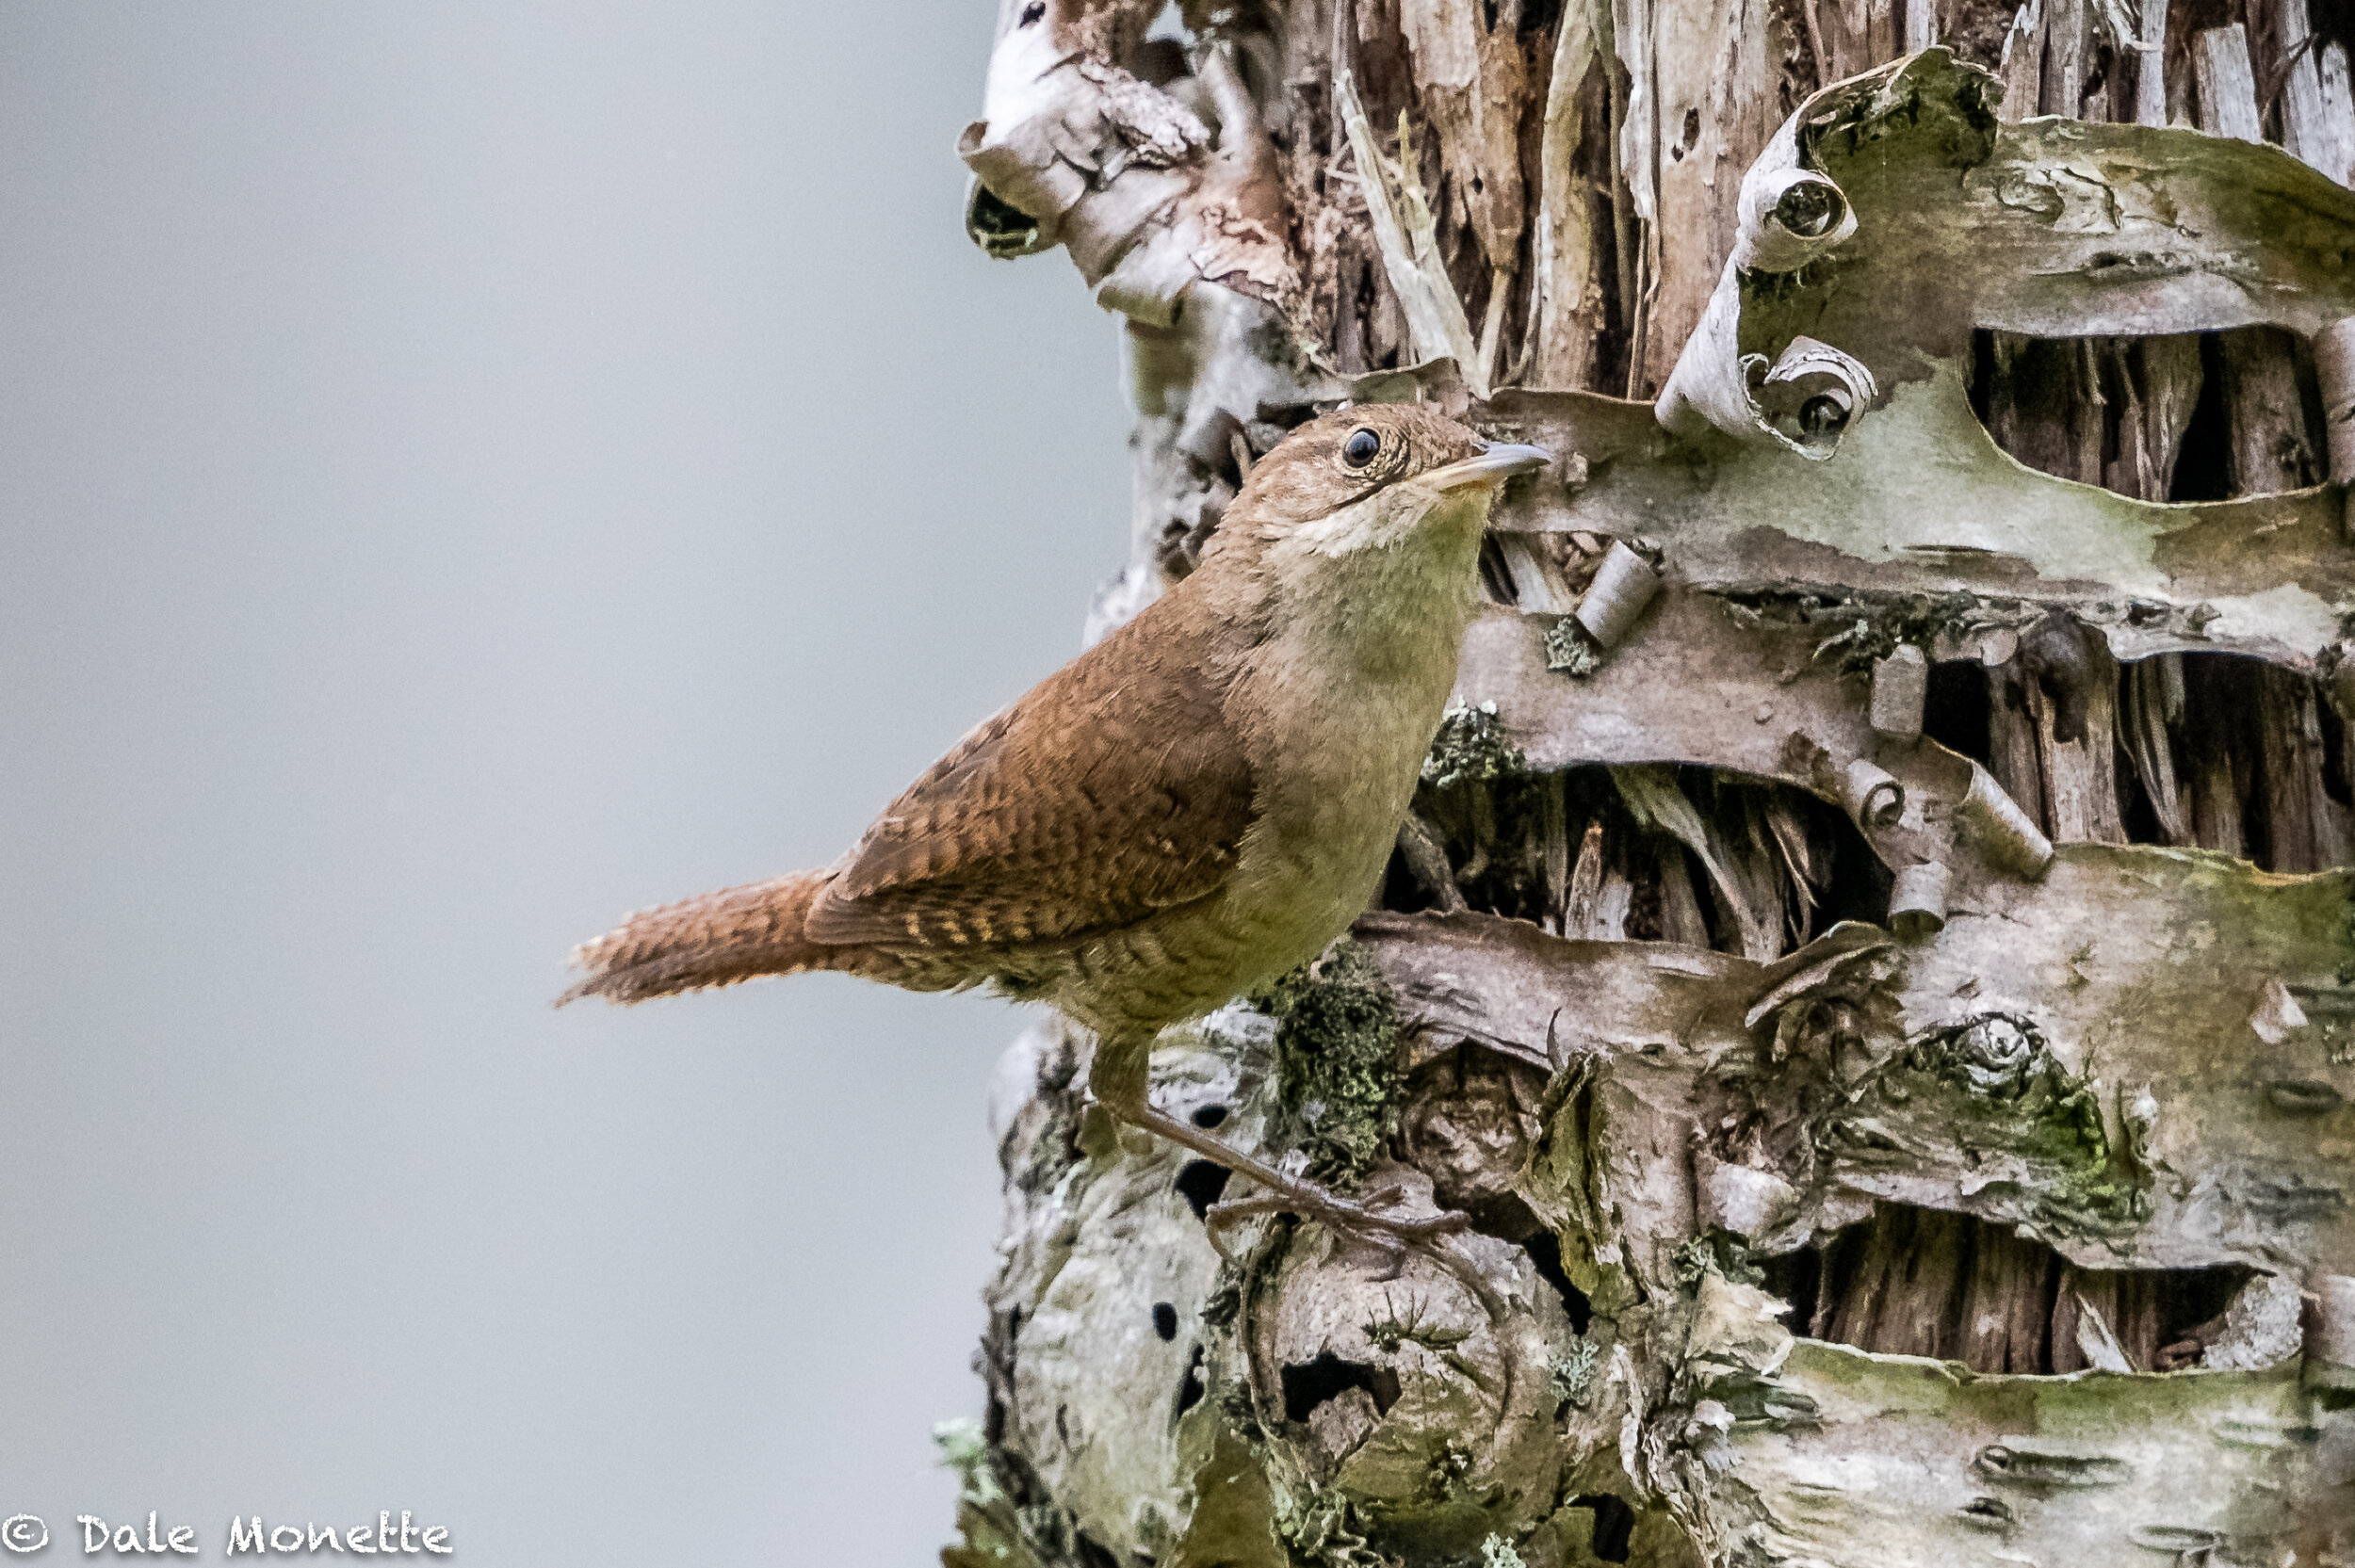   This tiny house wren popped up in front of me in the heron pond a few days ago.  I was surprised to see it there.  